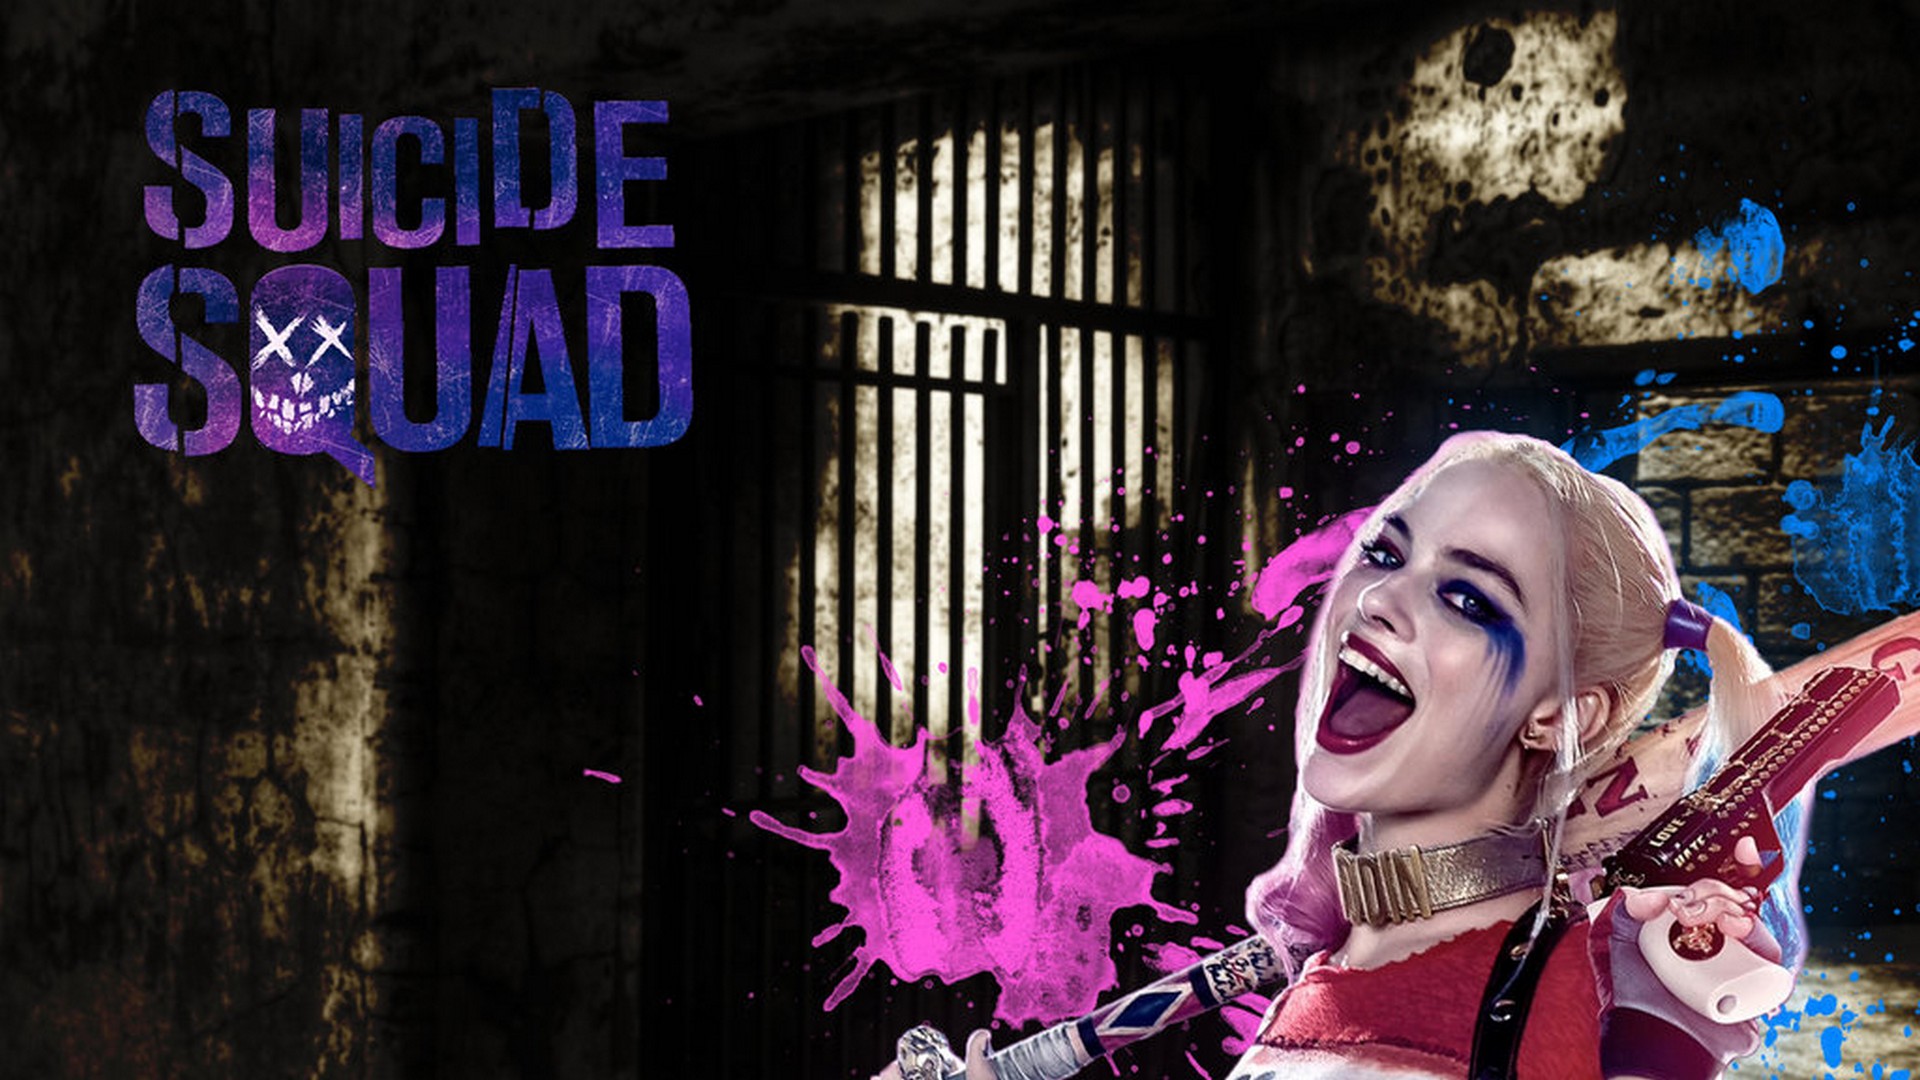 HD Wallpaper Harley Quinn Shirt with image resolution 1920x1080 pixel. You can make this wallpaper for your Desktop Computer Backgrounds, Mac Wallpapers, Android Lock screen or iPhone Screensavers